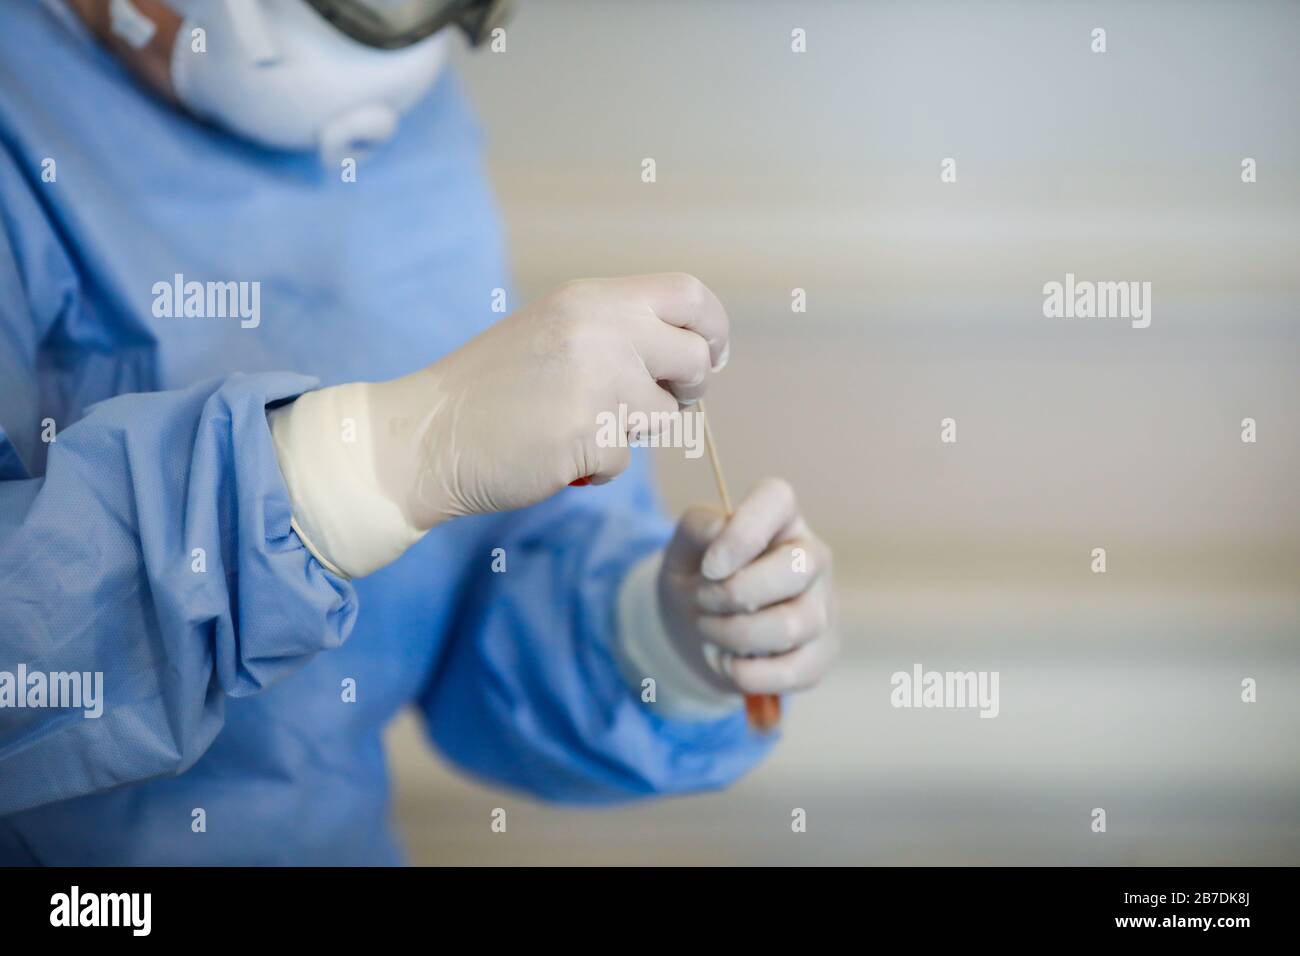 Bucharest, Romania - March 13, 2020: Details with the hands of a medic using a coronavirus test on a person. Stock Photo